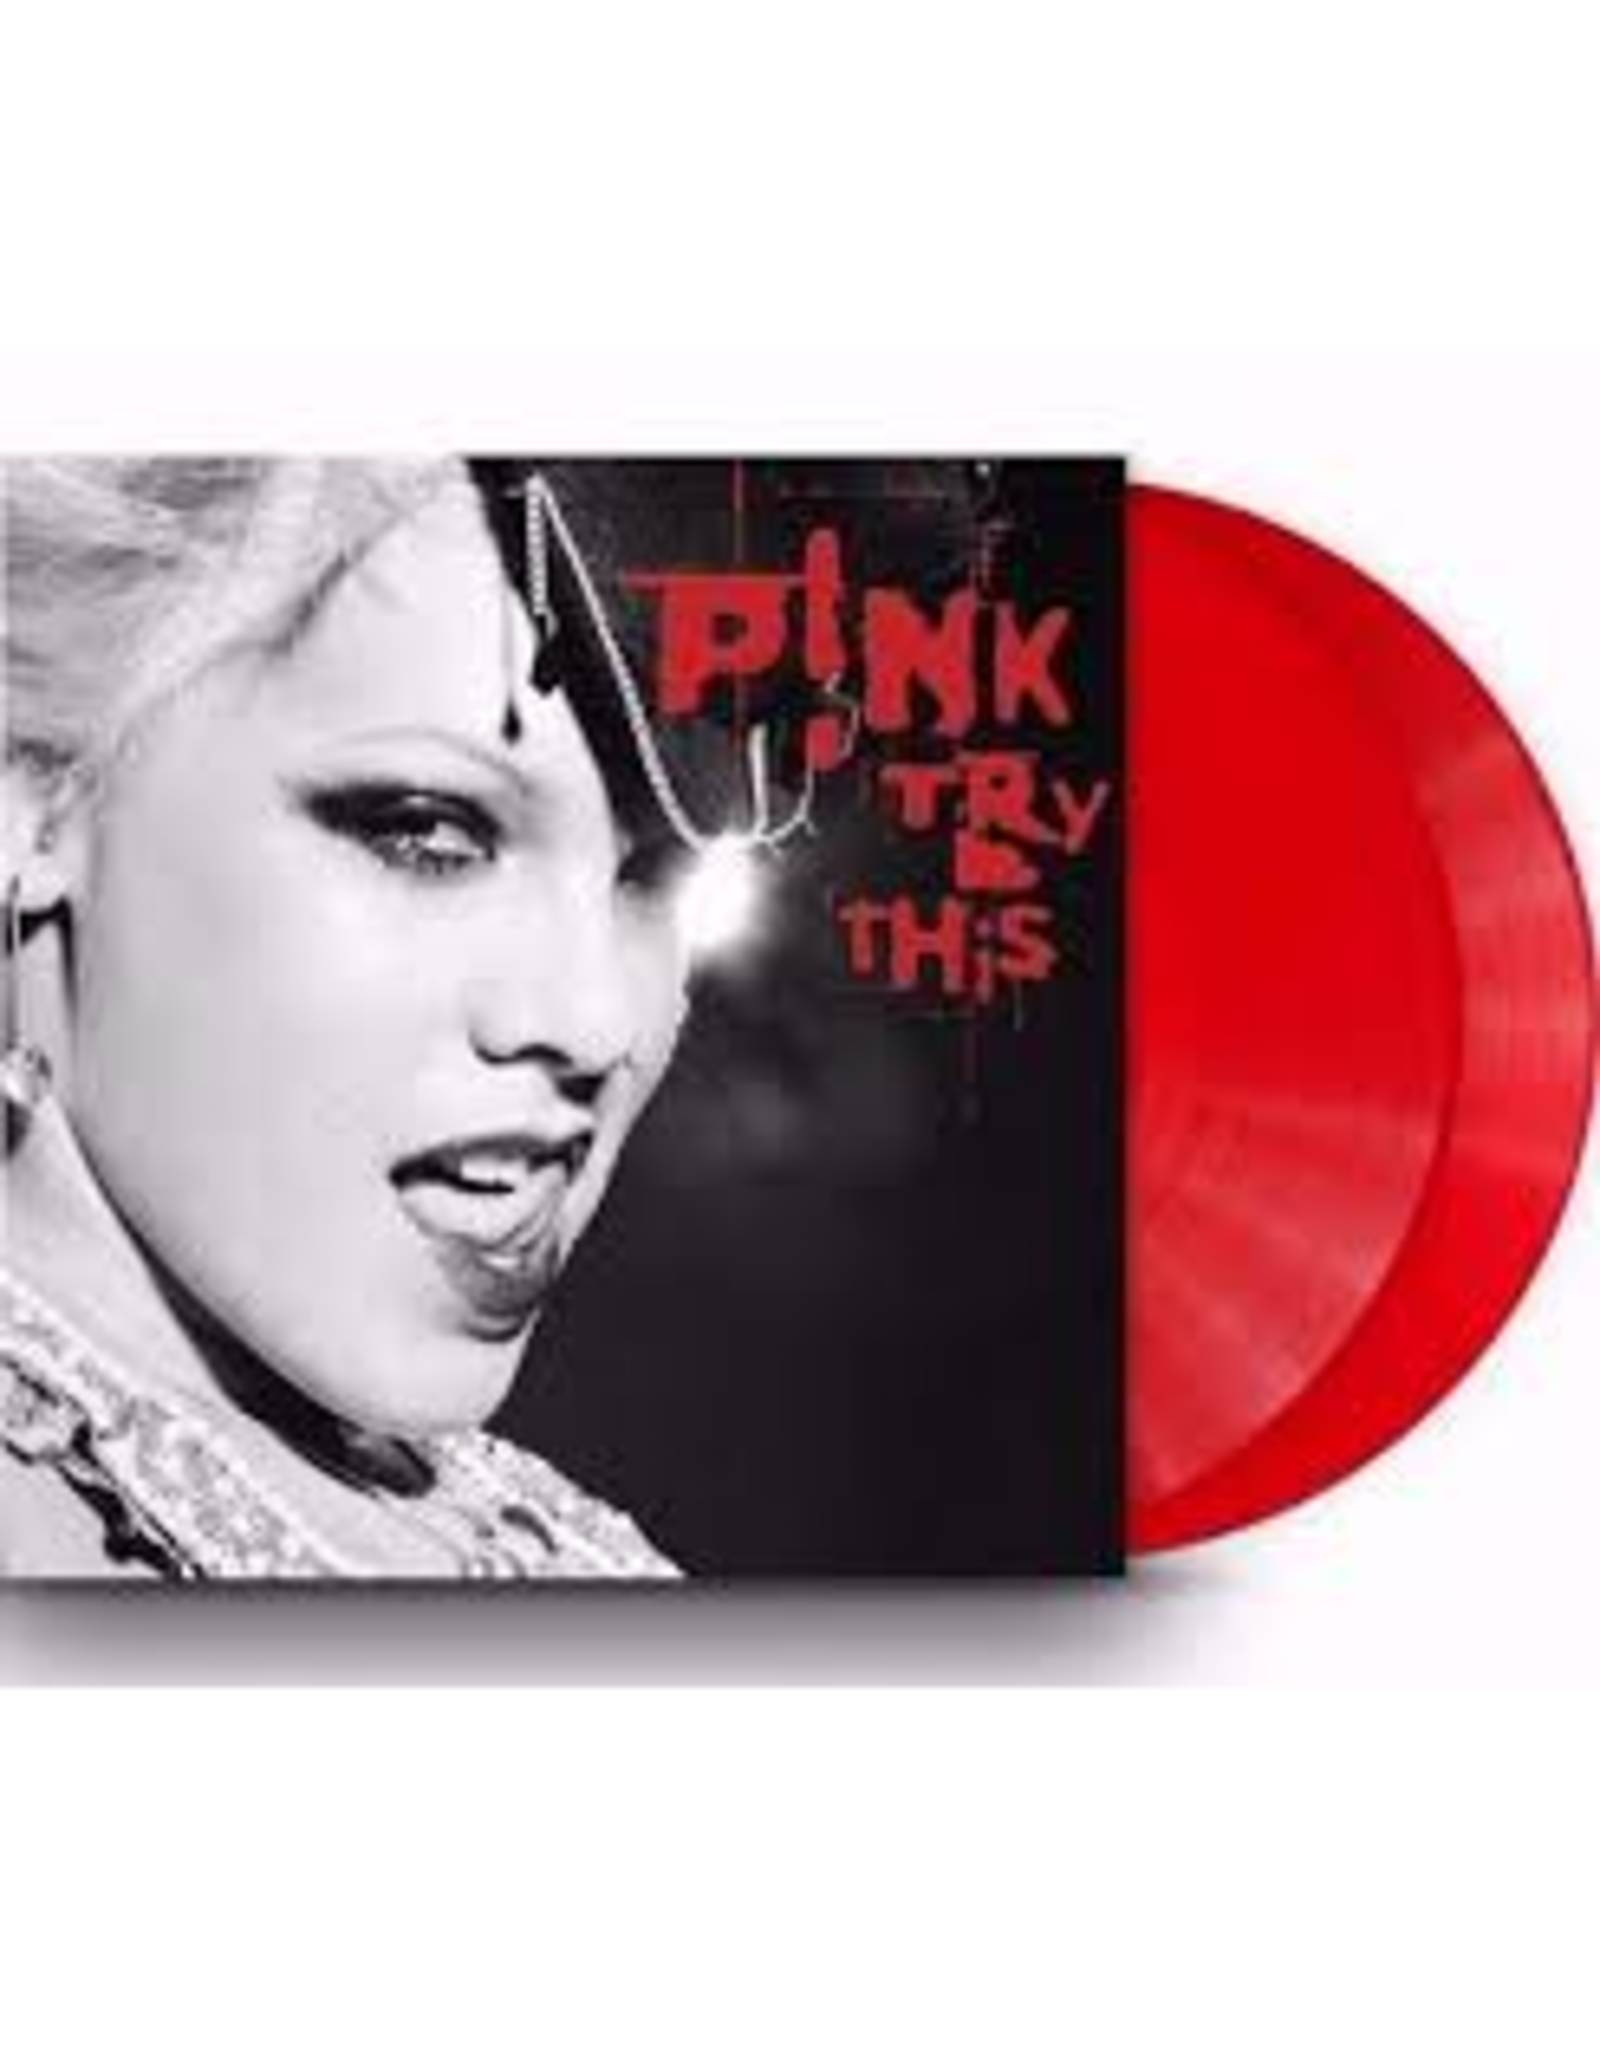 P!nk - Try This (Red Vinyl)